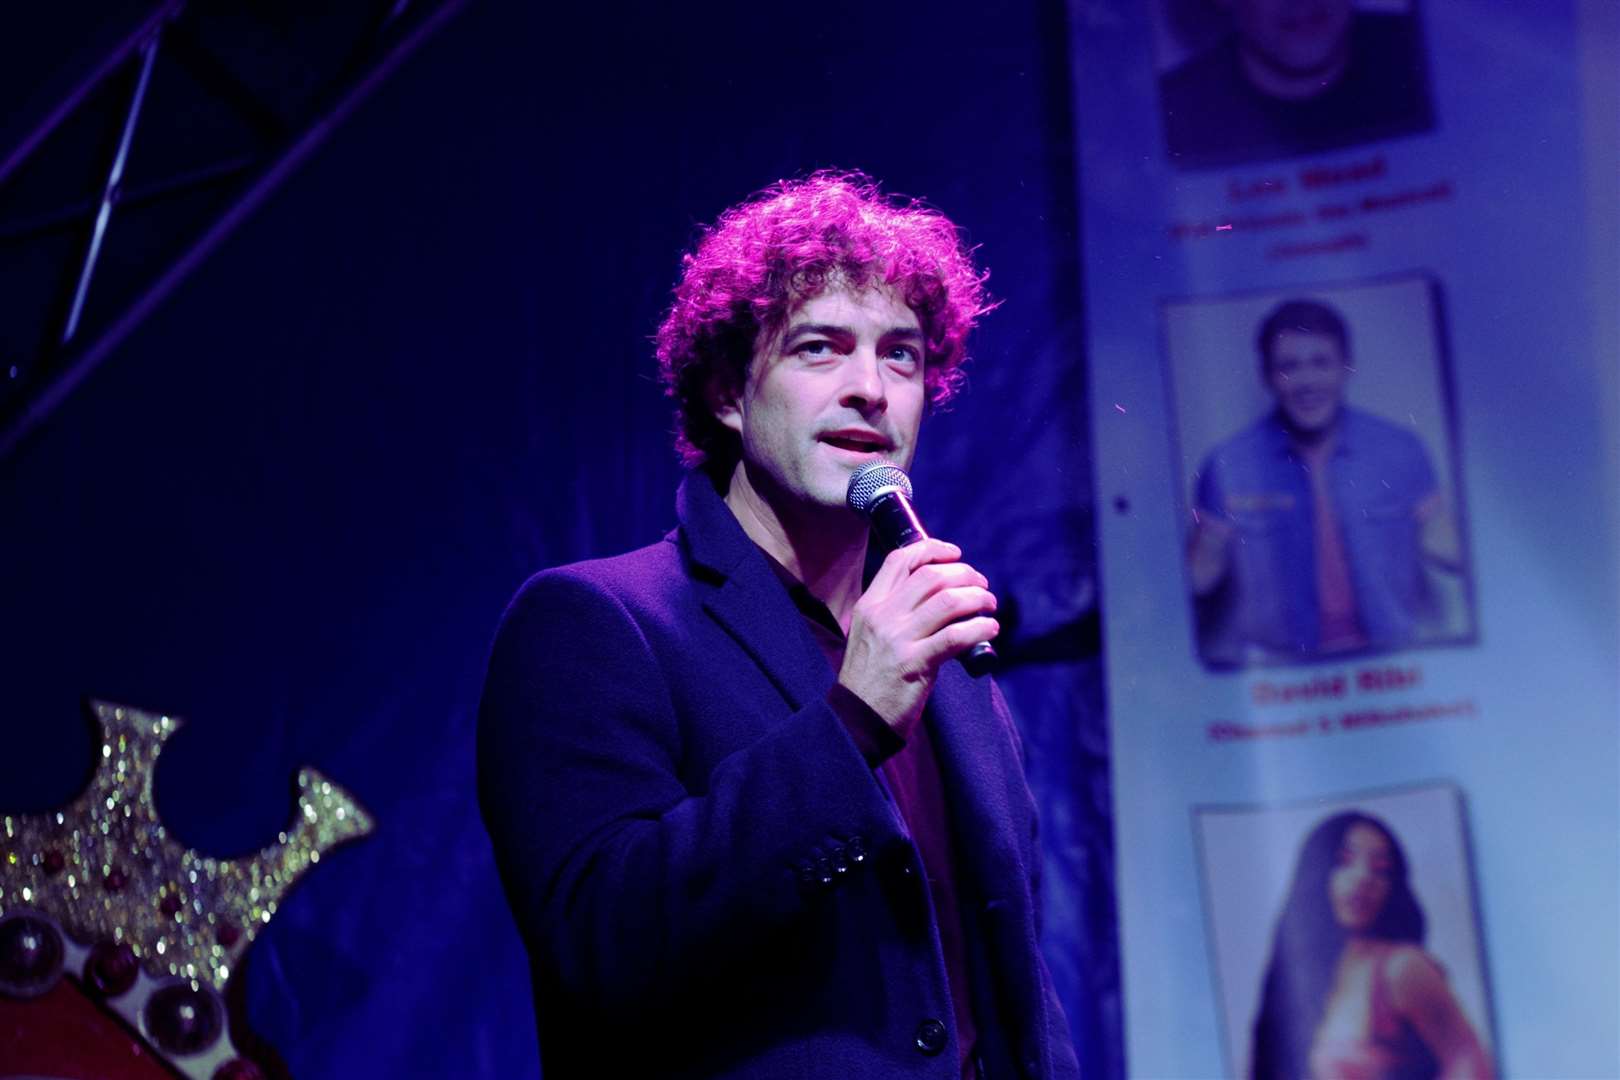 Lee Mead at the switch-on. Picture: Dartford Borough Council